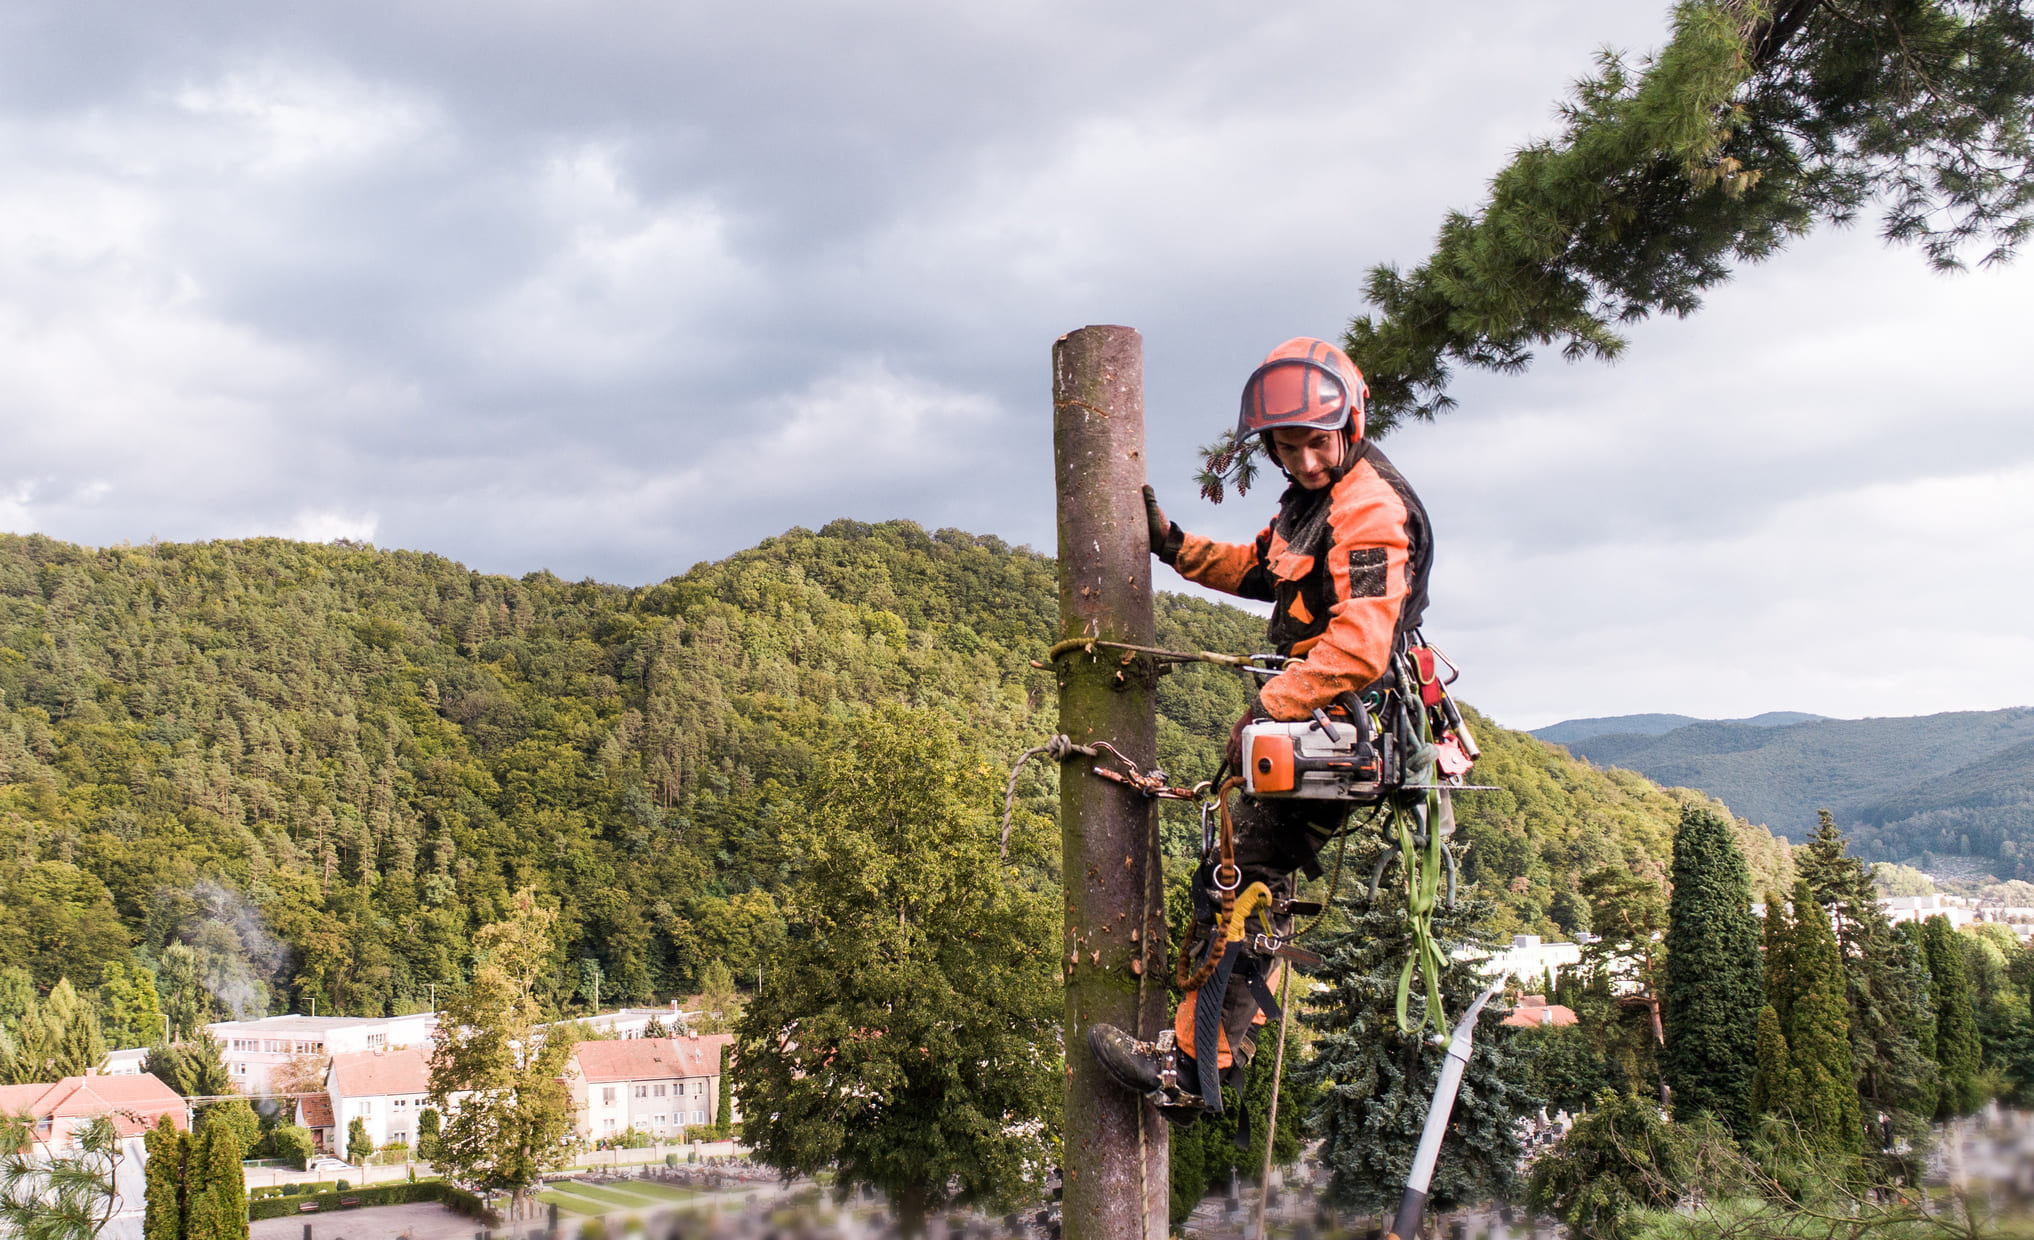 What does an arborist study? What skills do you need to be an arborist? What does an arborist do? How much is an arborist paid?